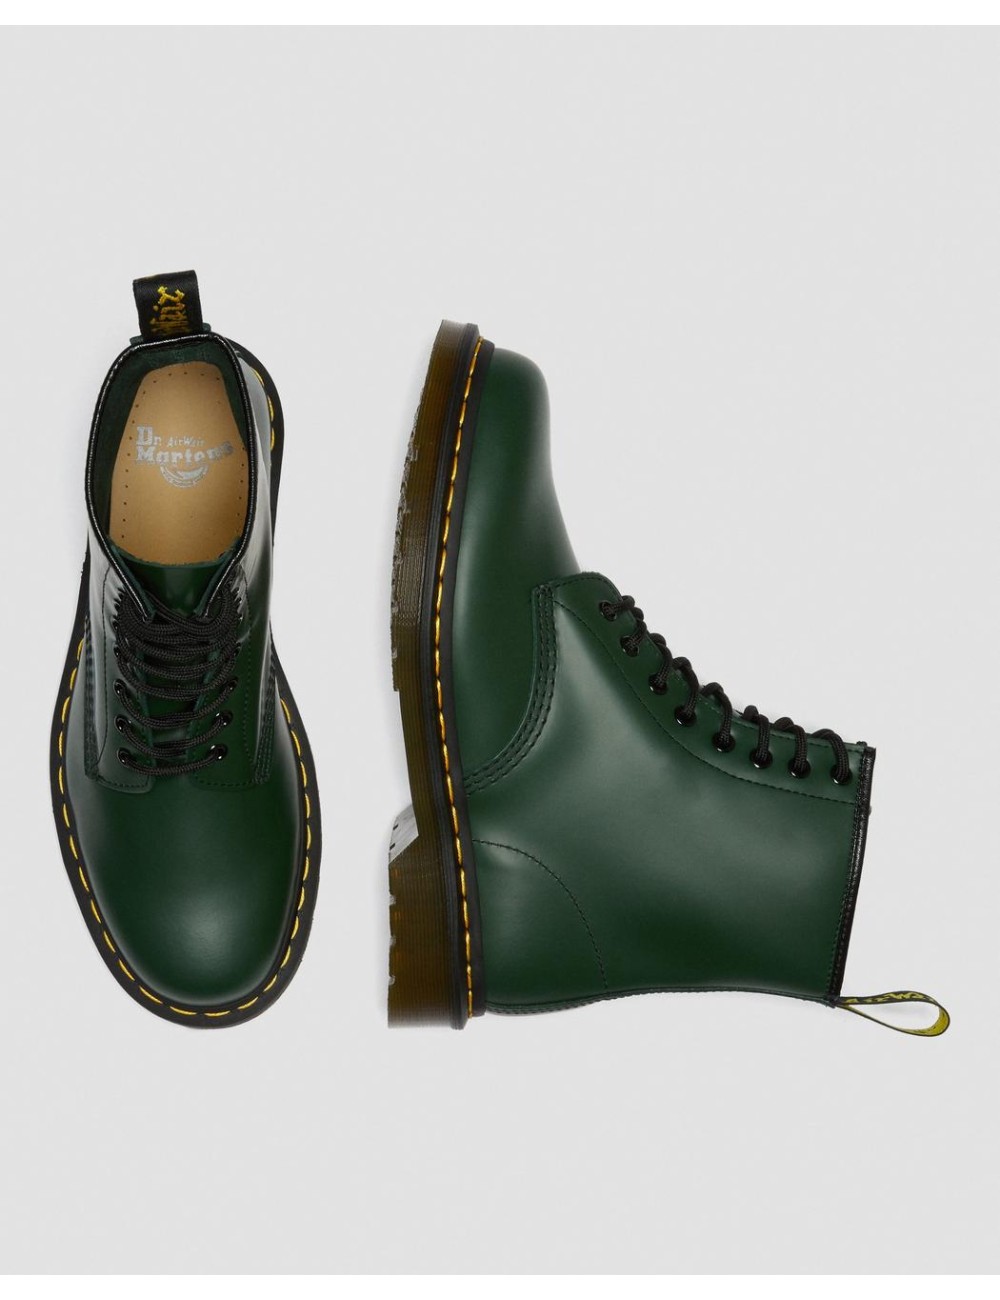 DR MARTENS 1460 SMOOTH GREEN BOOTS UNISEX